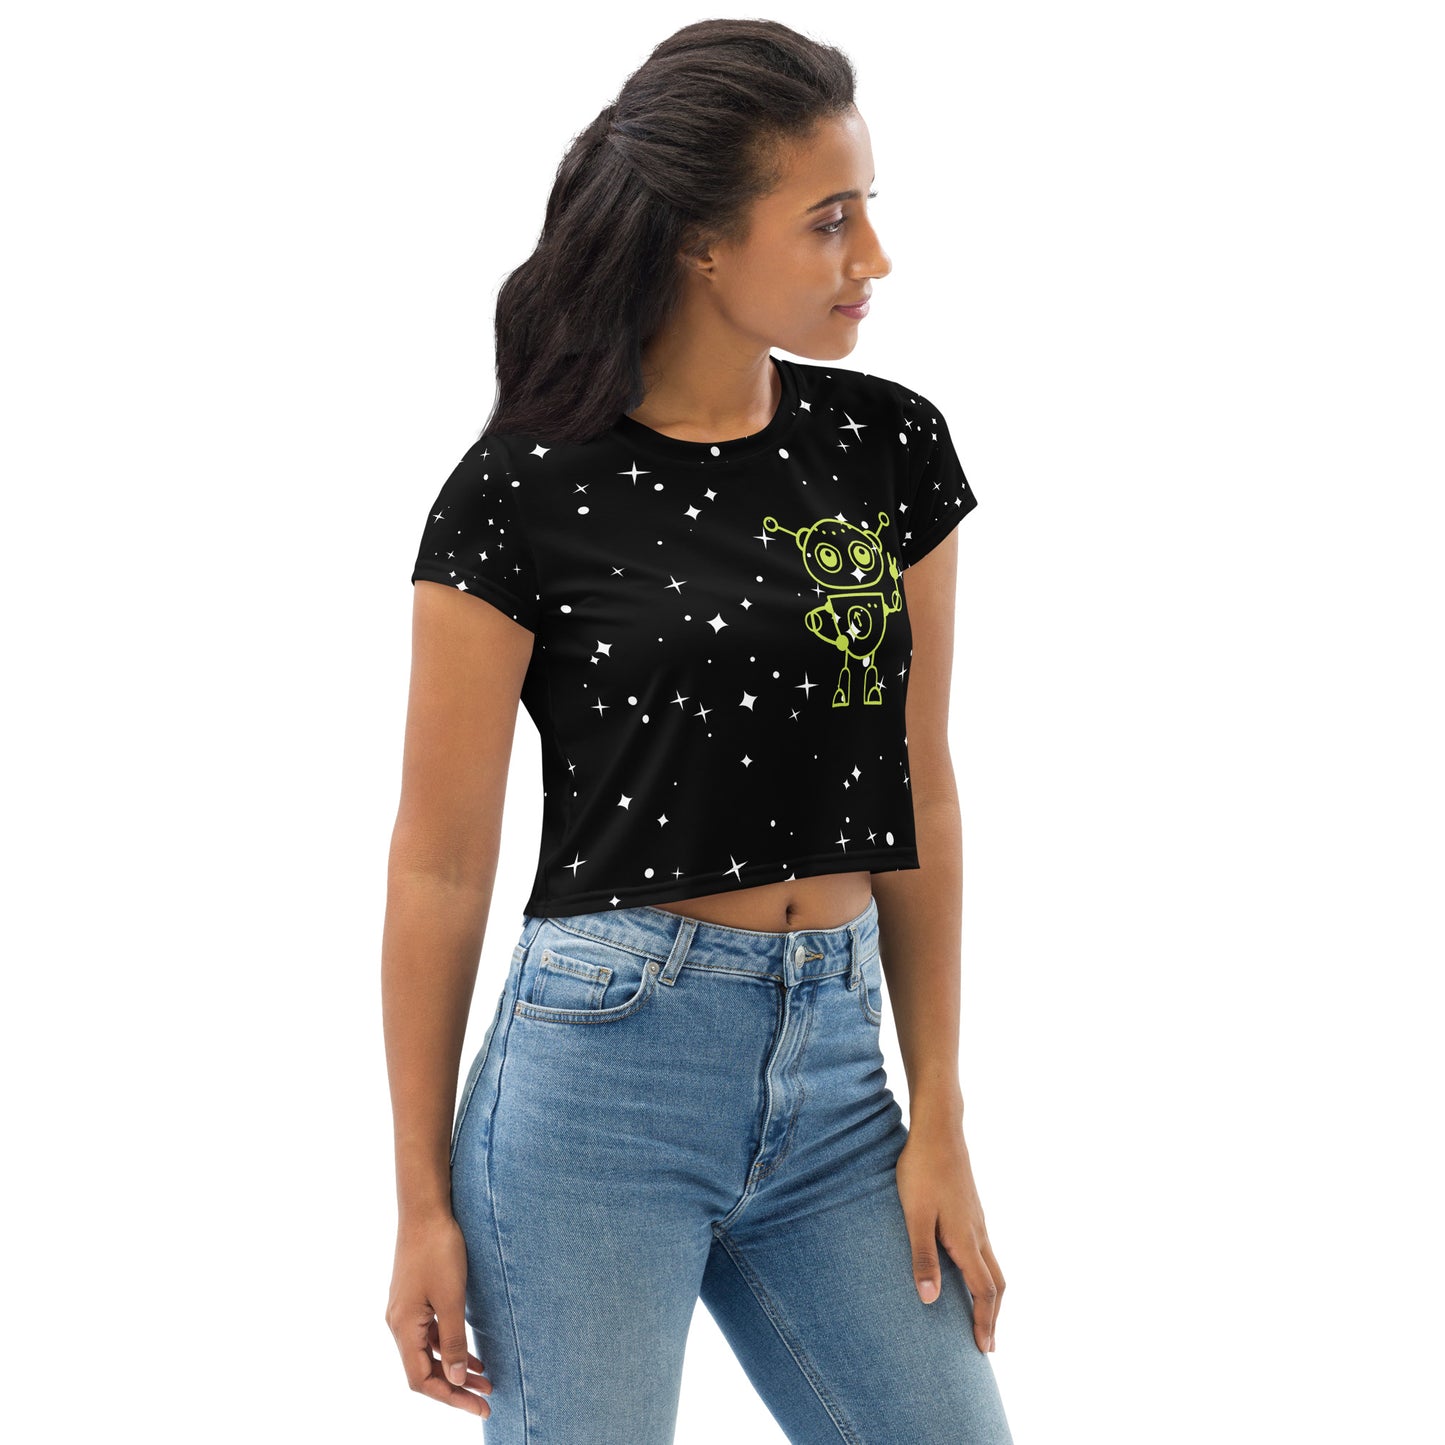 "I Come In Peace" Crop Top